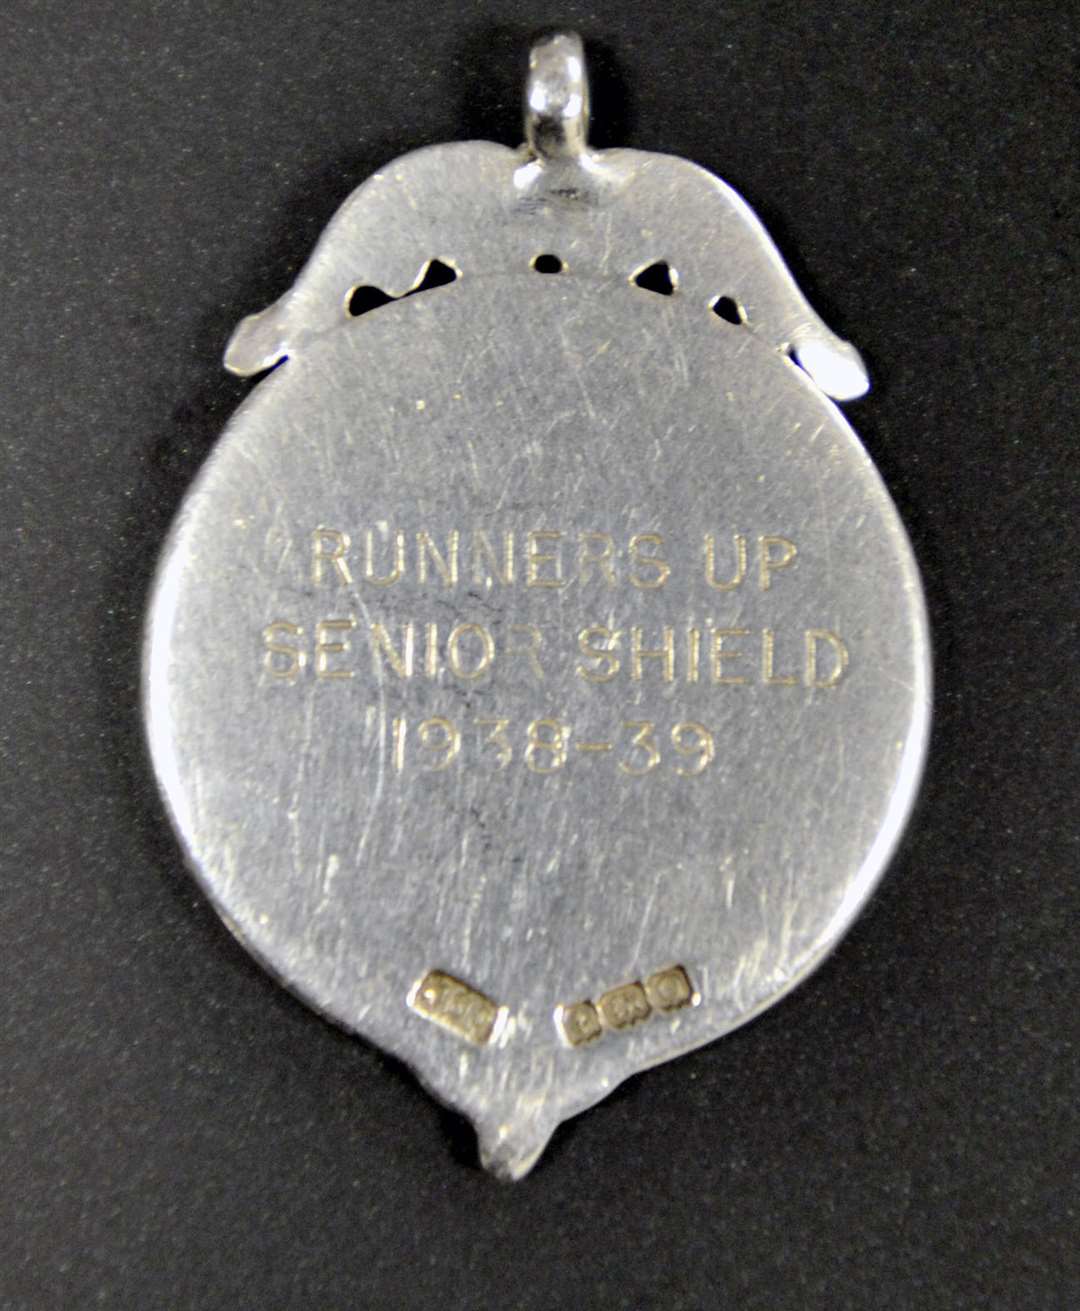 On the other side, there is the inscription Runners Up Senior Shield 1938-39